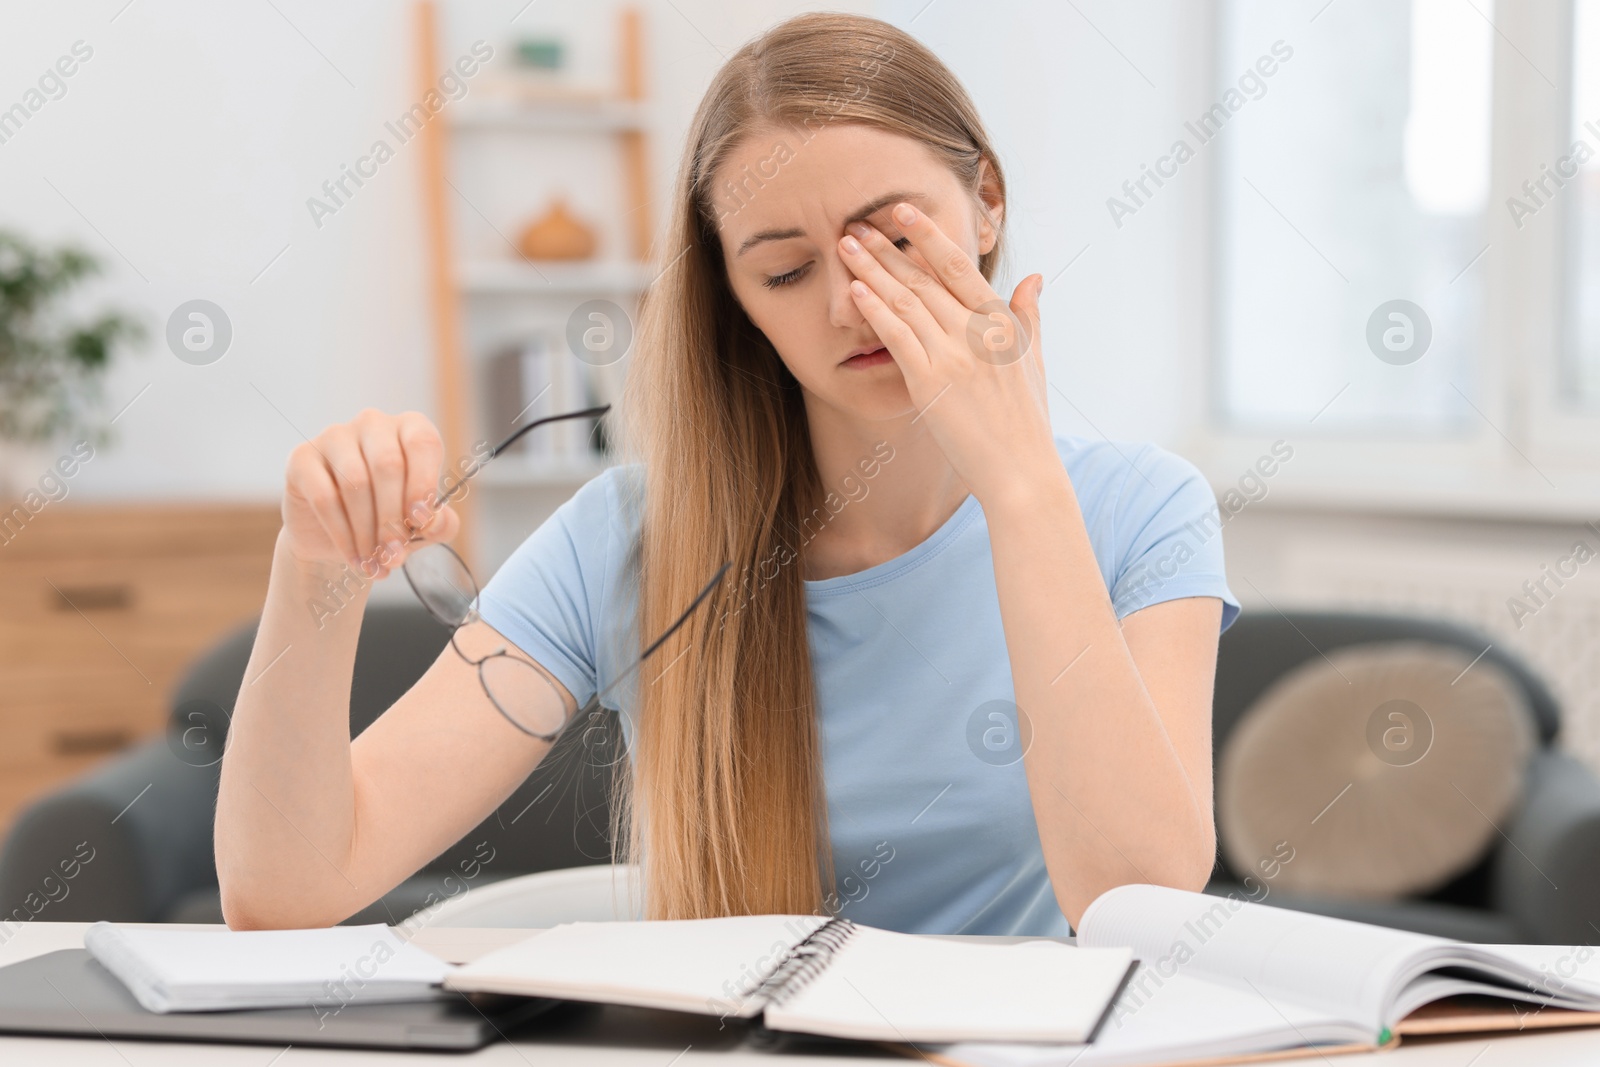 Photo of Overwhelmed young woman with glasses and books at table in room